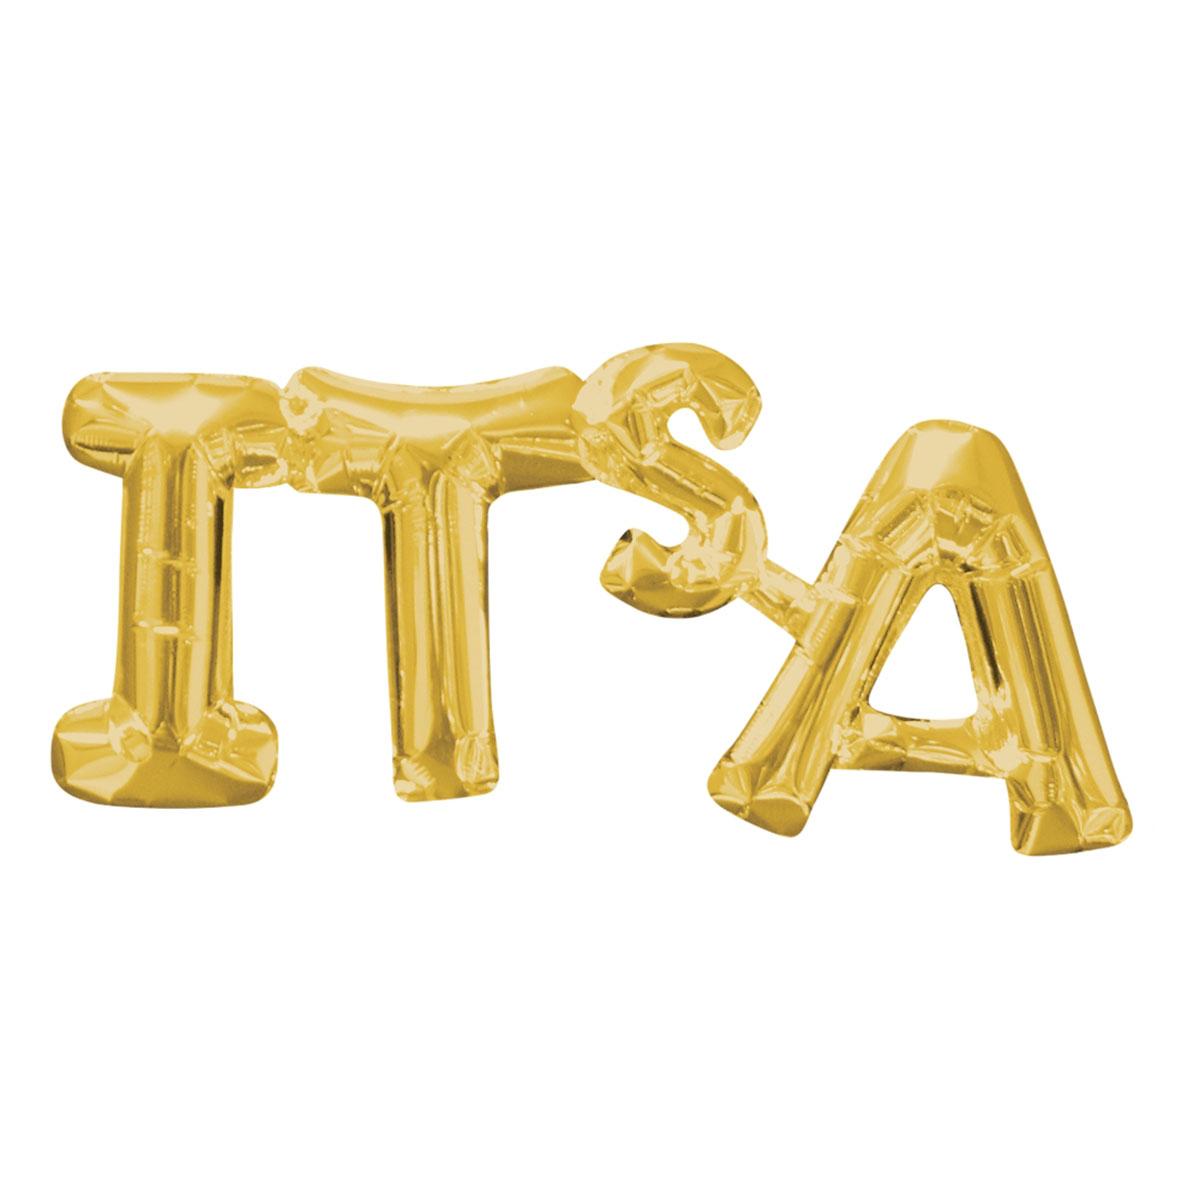 It's A Gold Phrase Foil Balloon 29x9in Balloons & Streamers - Party Centre - Party Centre